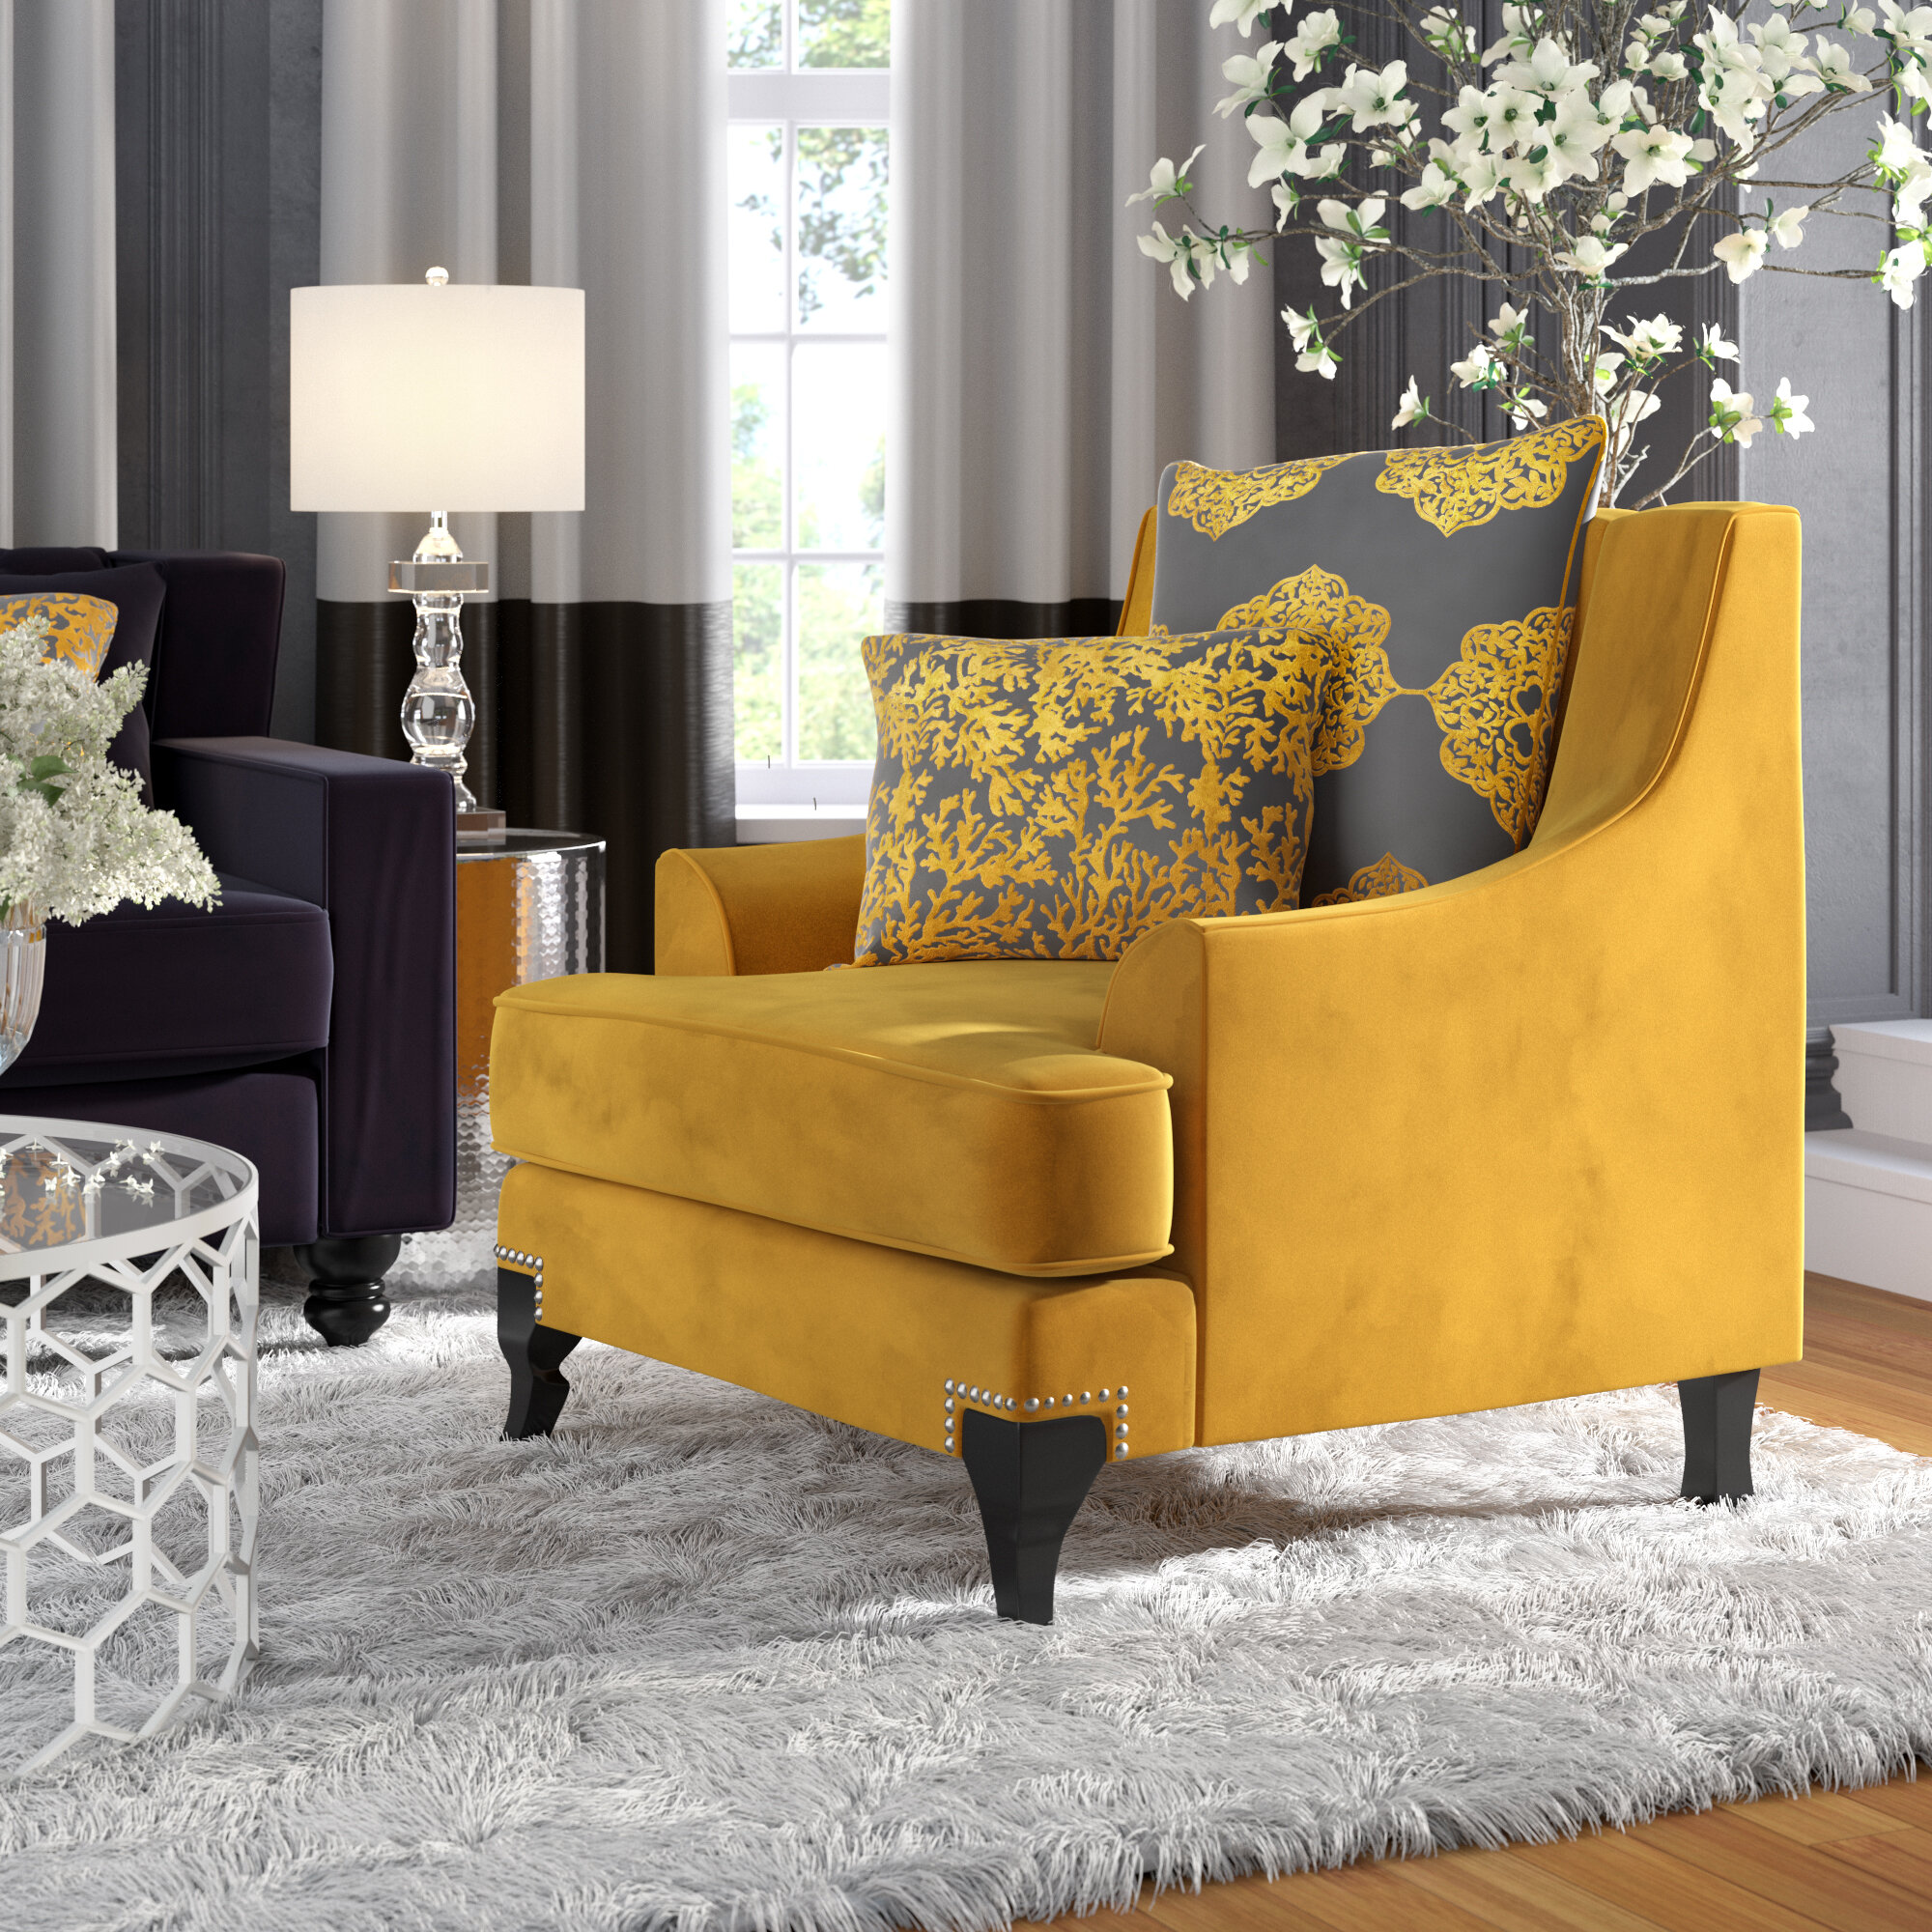 Yellow Living Room Chair - Saloon Fabric Print Accent Chair Yellow Gray